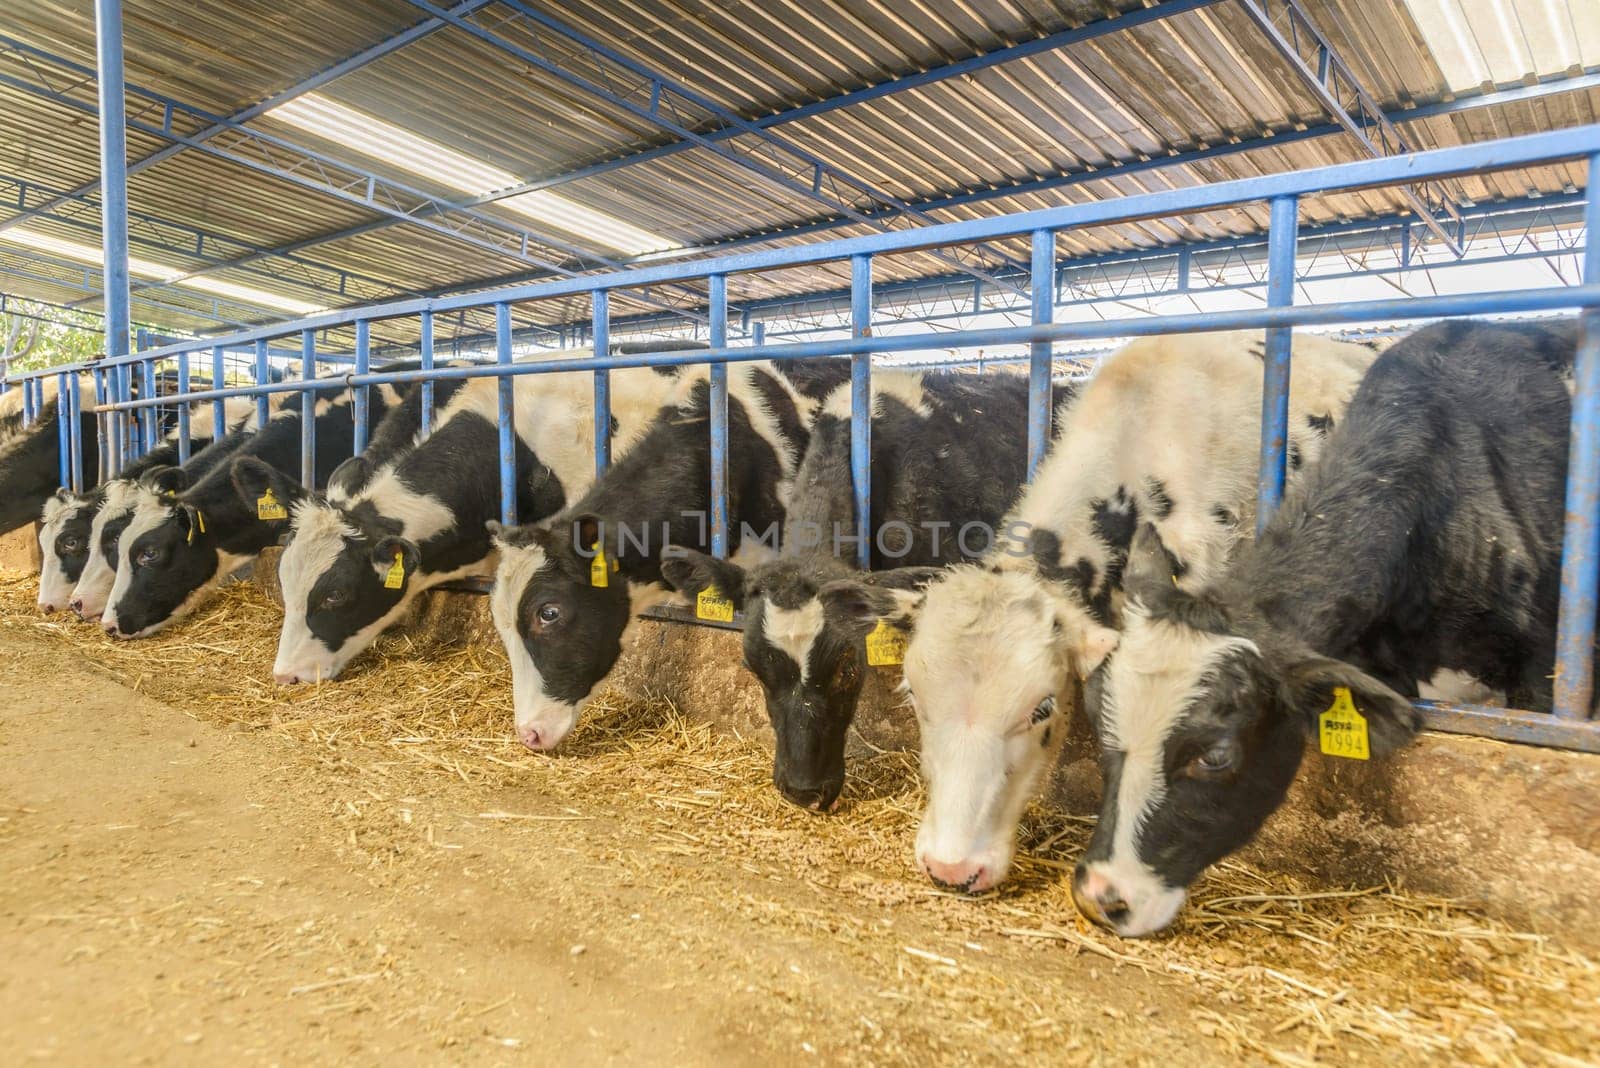 agriculture industry, farming and animal husbandry concept - herd of cows eating hay in cowshed on dairy farm by emirkoo